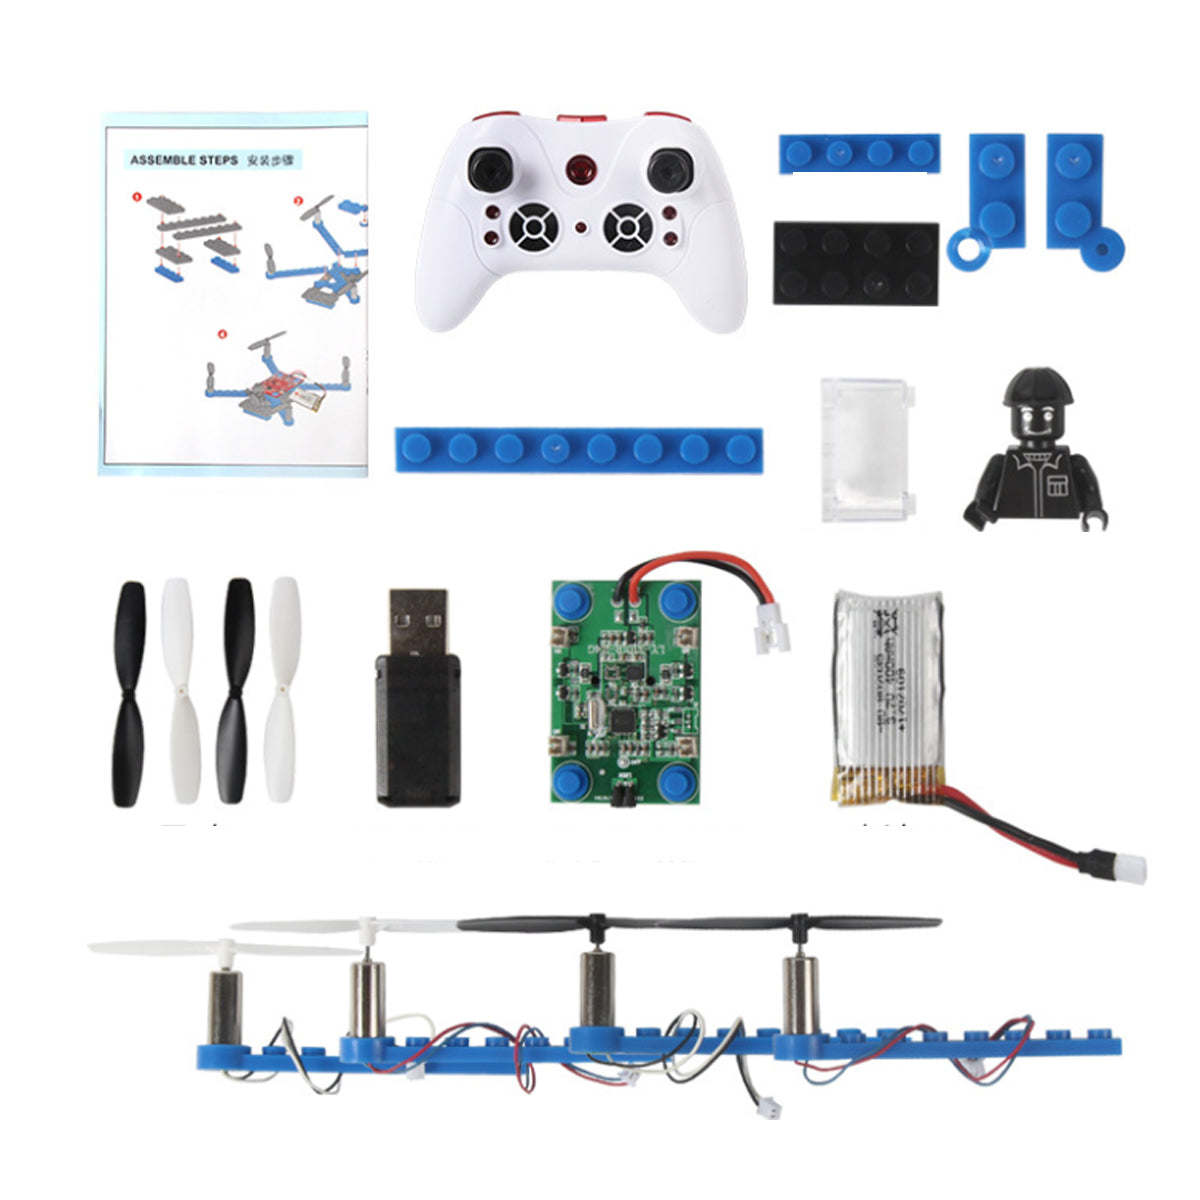 A kids' DIY Drone Building STEM Project For Kids with a remote control attached to it, perfect for STEM projects.